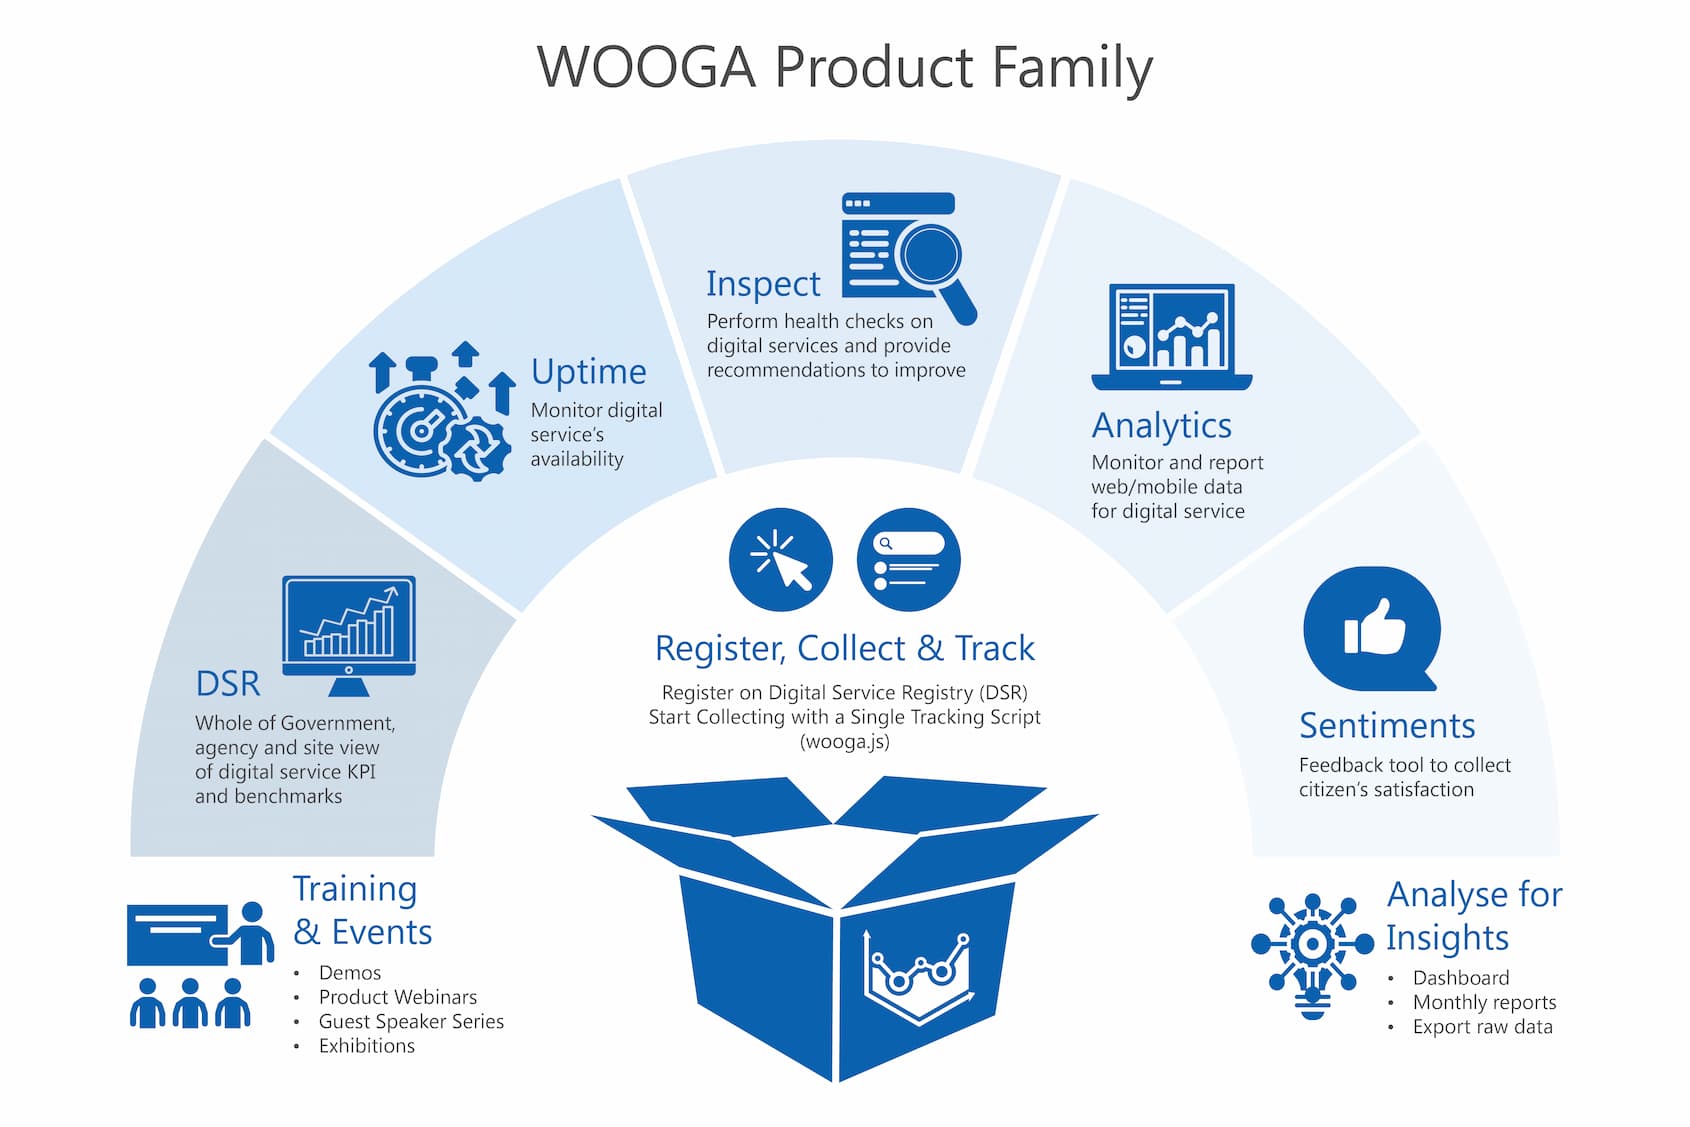 WOGAA Product family and the different capabilities